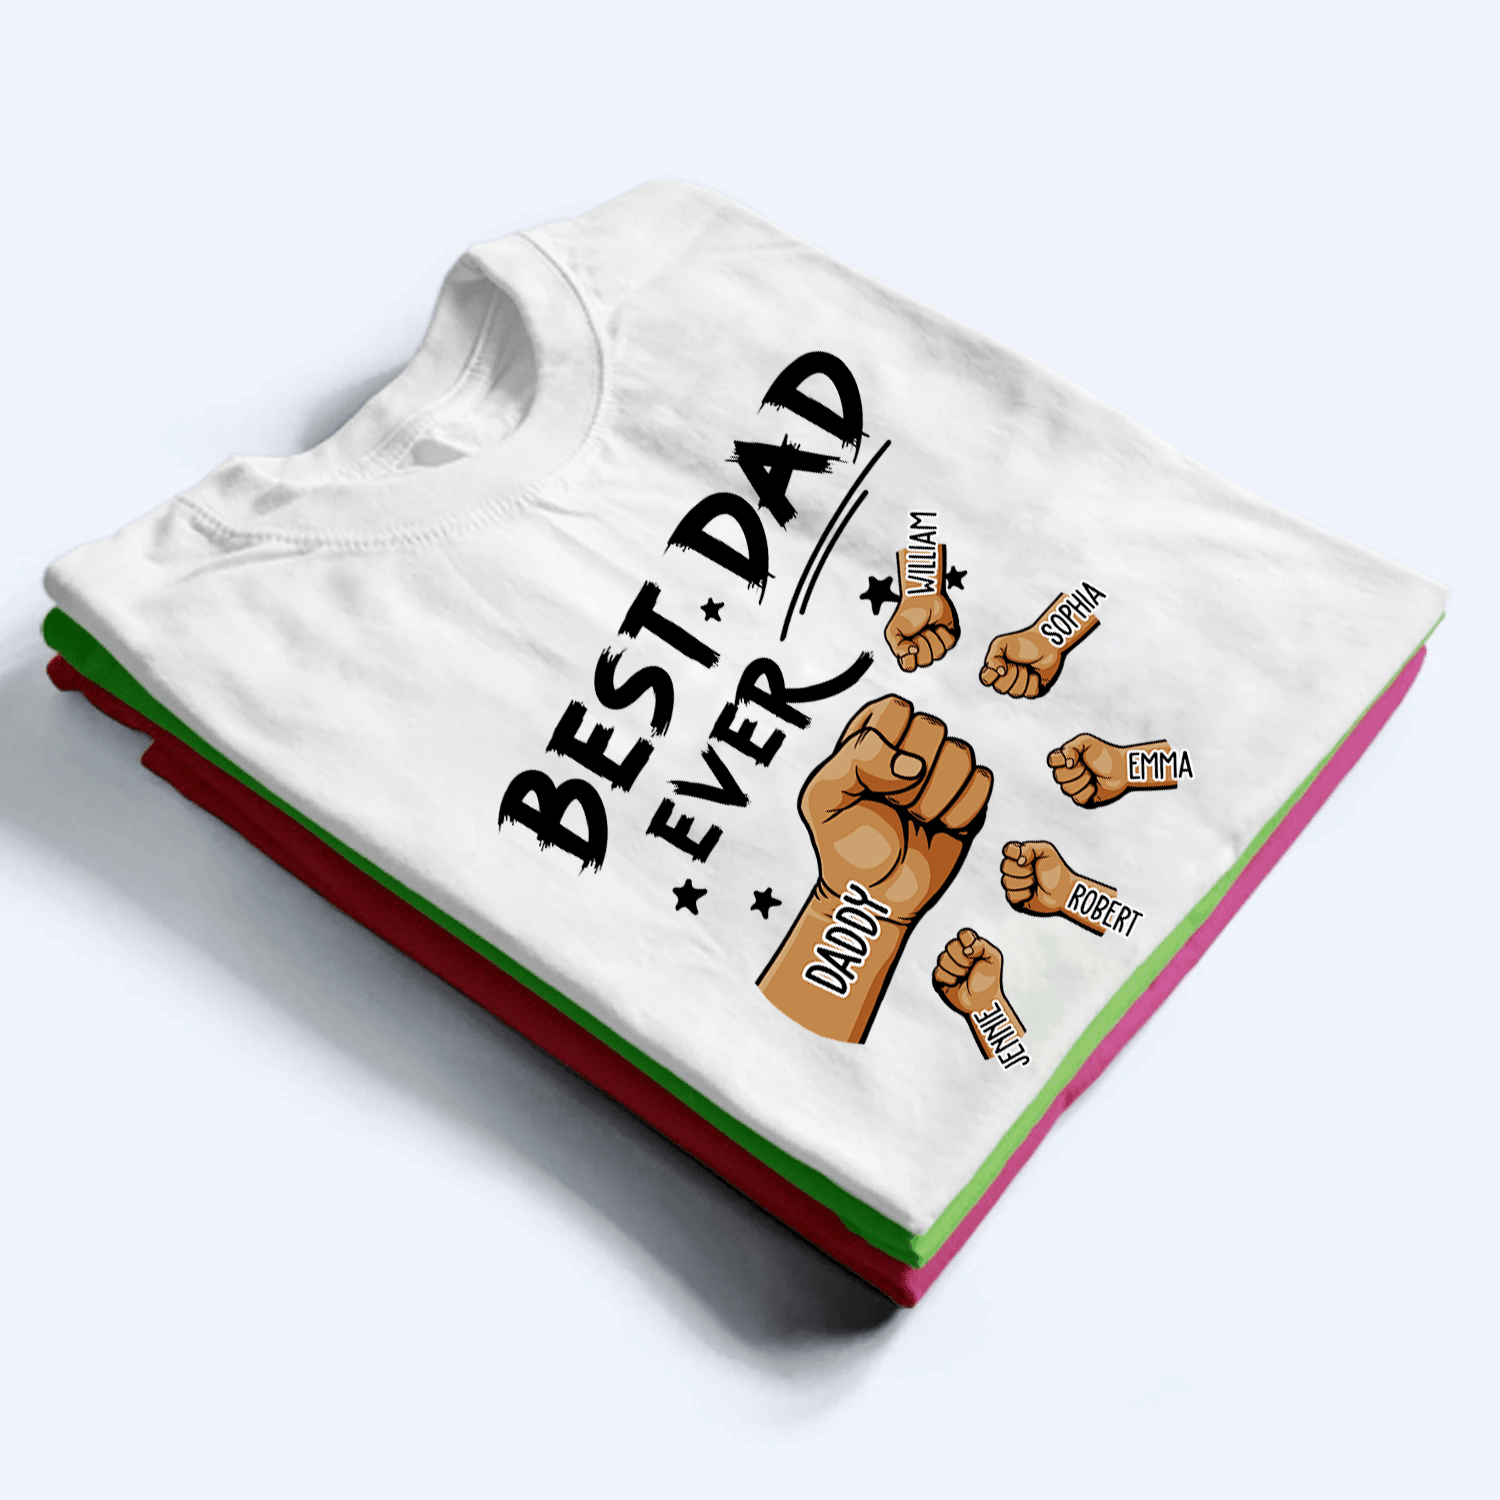 The Best Dad Ever - Personalized Custom T Shirt - Father's Day Gift for Dad, Papa, Grandpa, Daddy, Dada - Suzitee Store